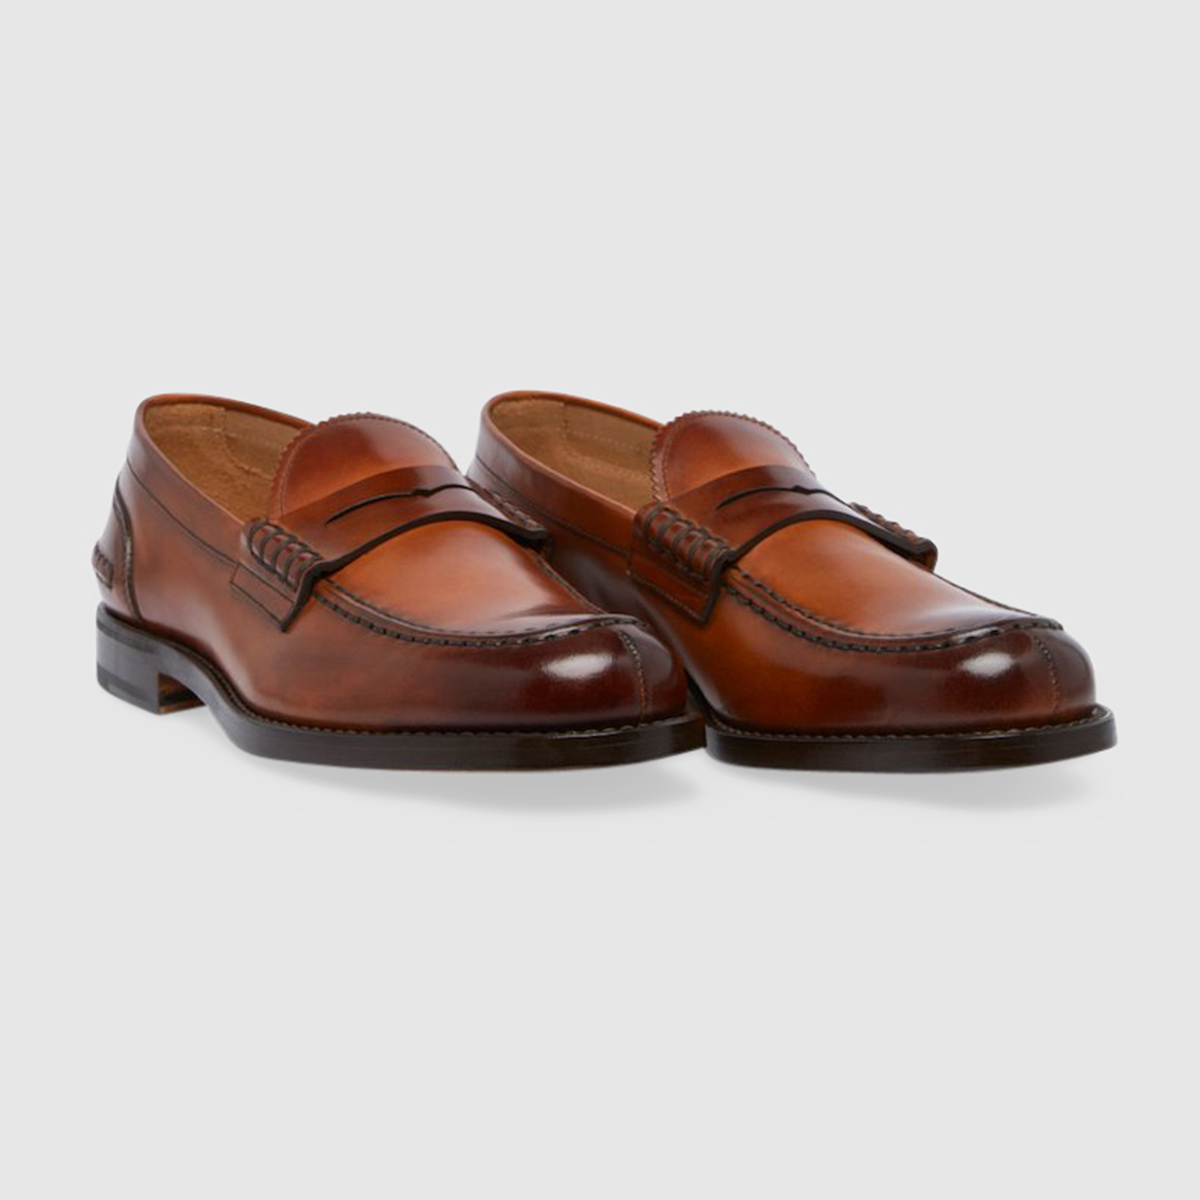 College Loafers in Brown  Calfskin Leather Gruppo Fabi on sale 2022 2